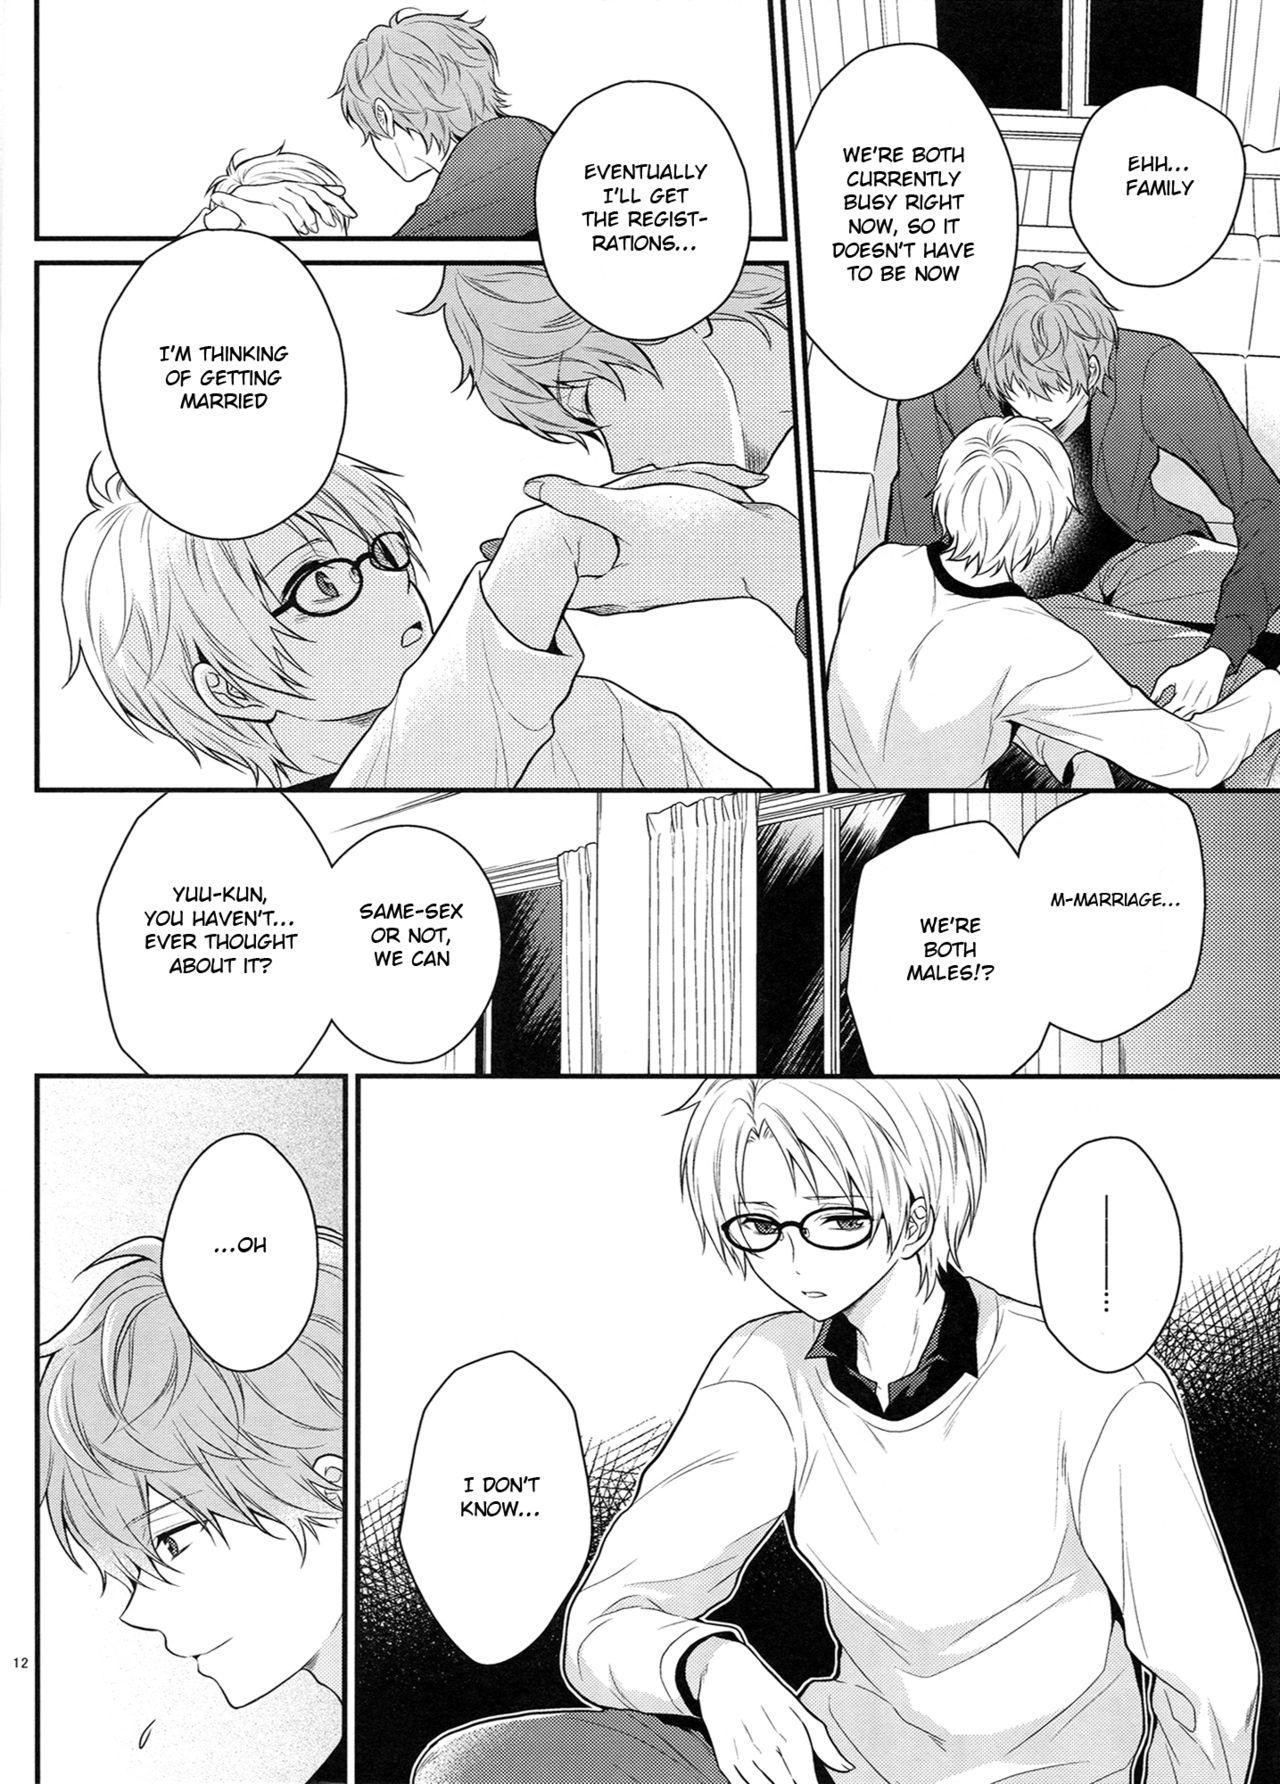 Rough Sex Maybe Homesick - Ensemble stars Chicks - Page 11